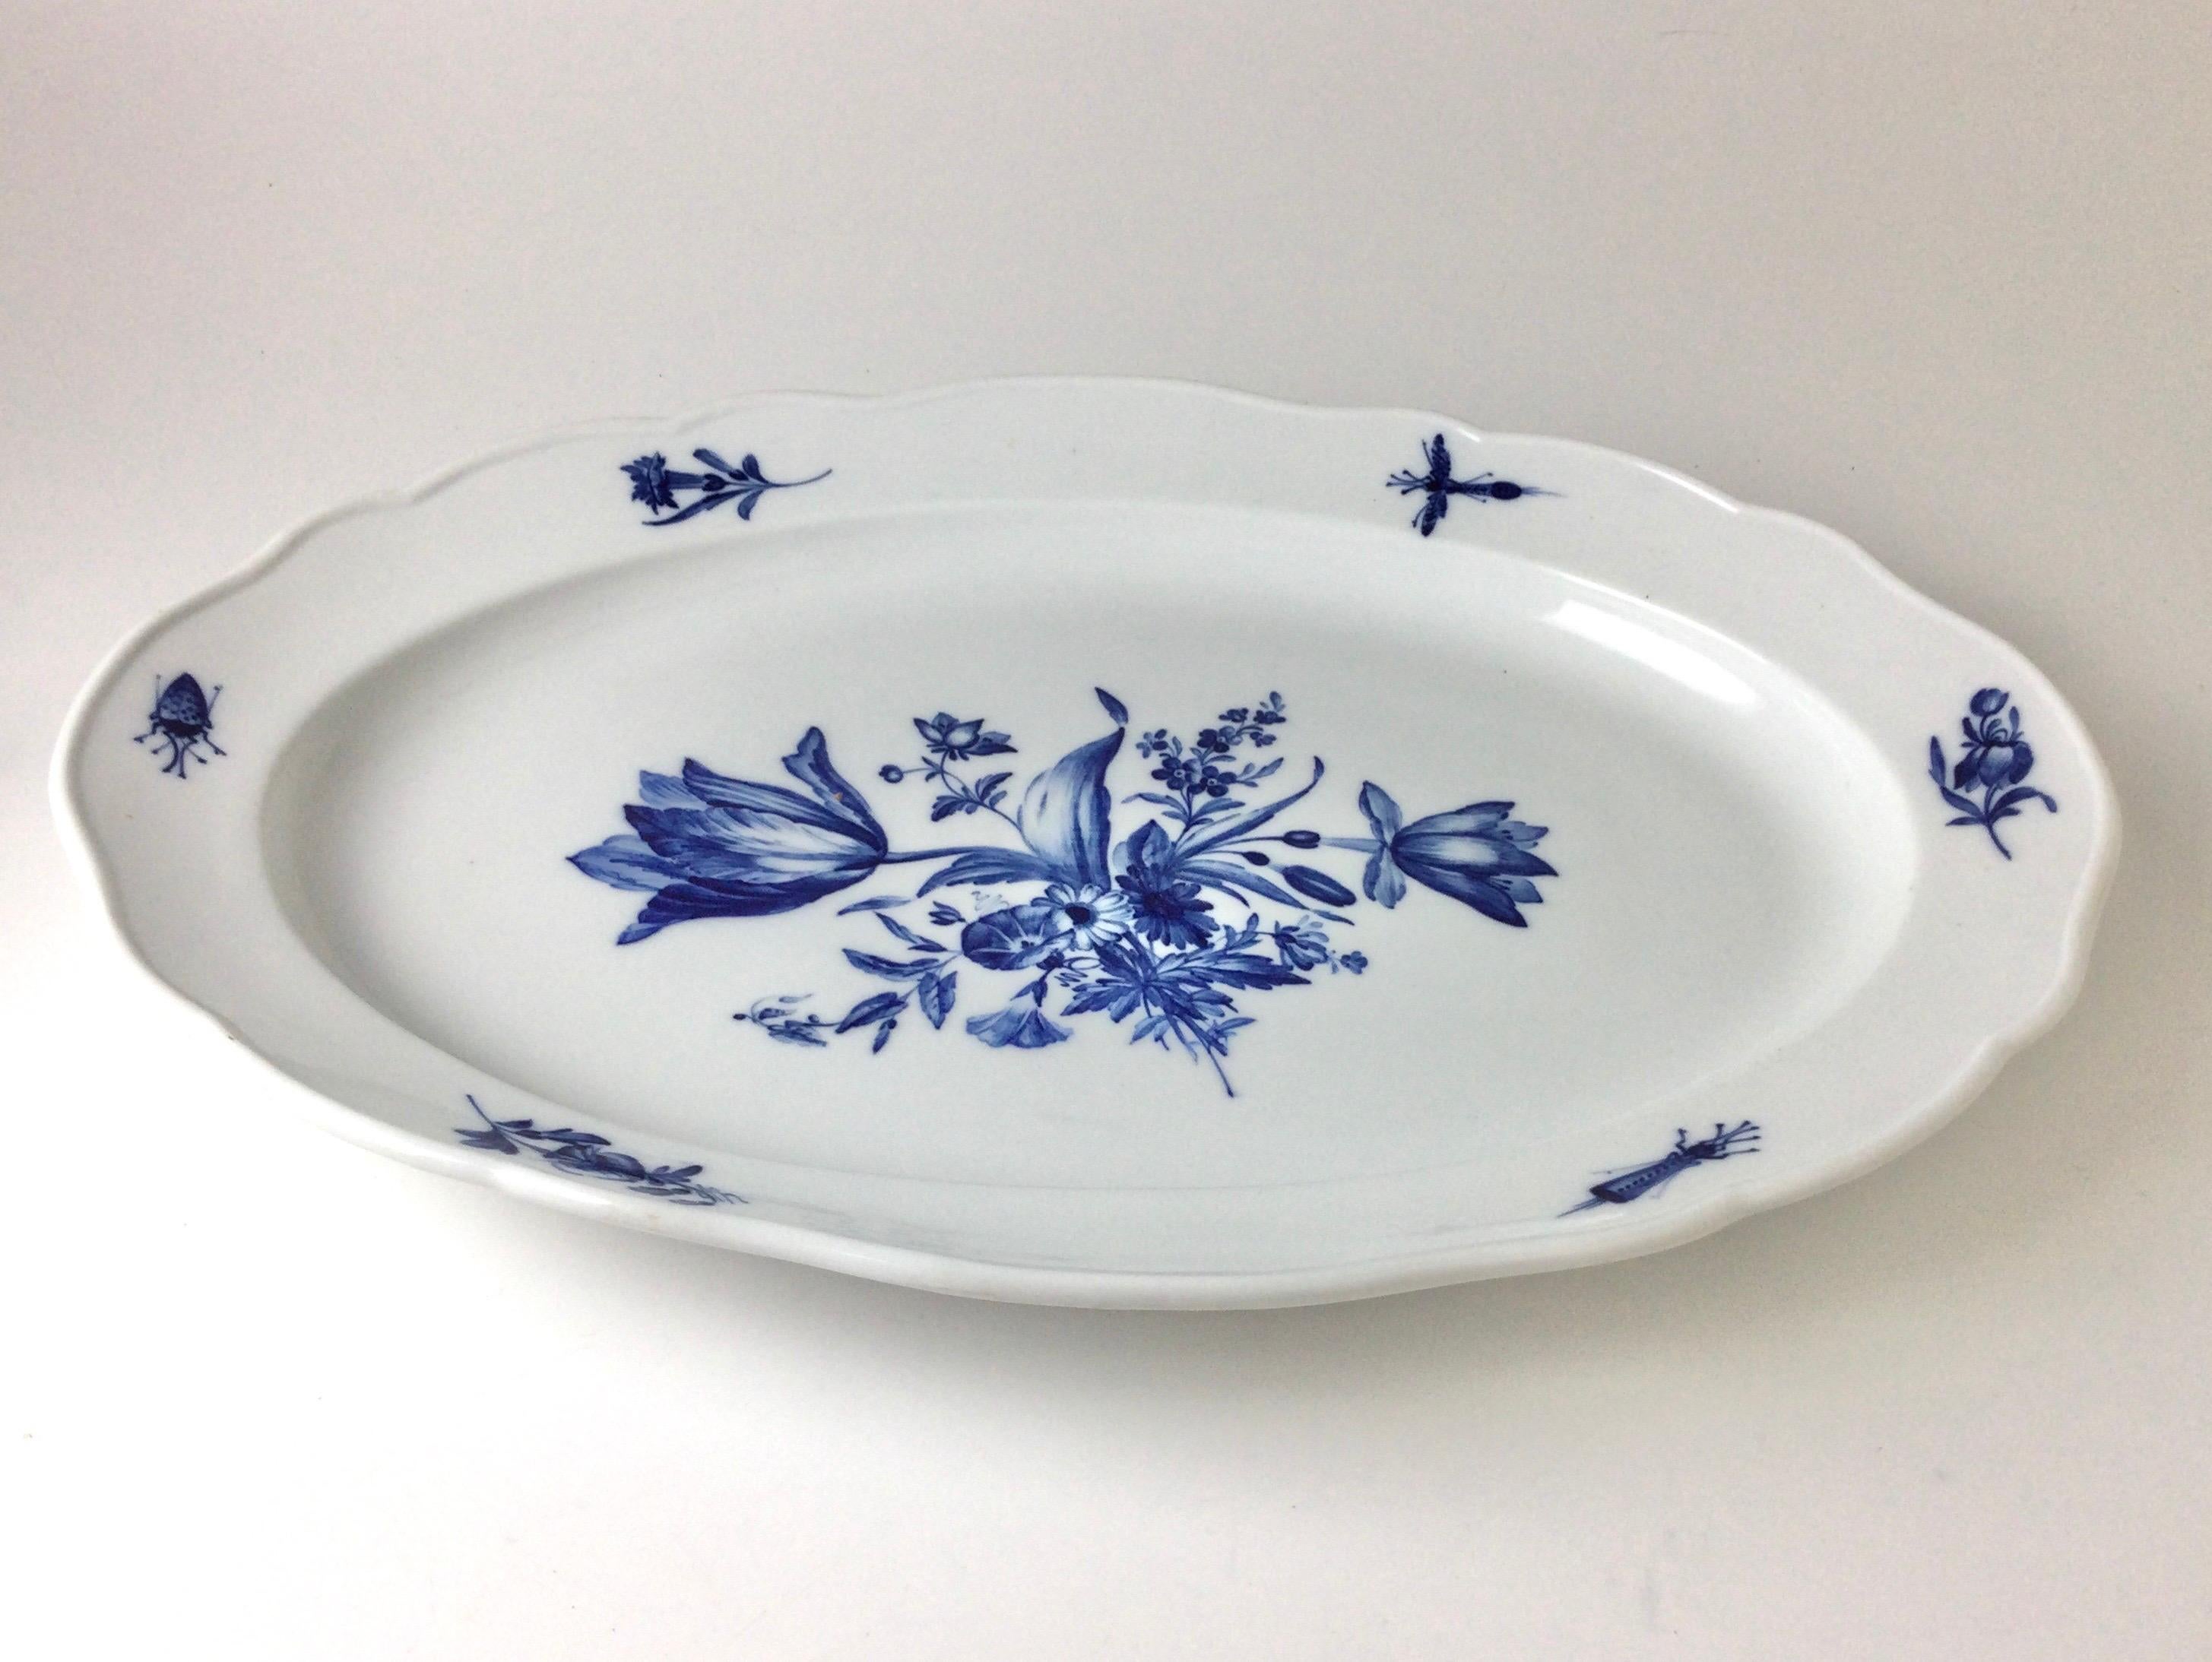 Large Meissen platter with painted blue bouquet of flowers and insects or bugs on rim. 20 1/4